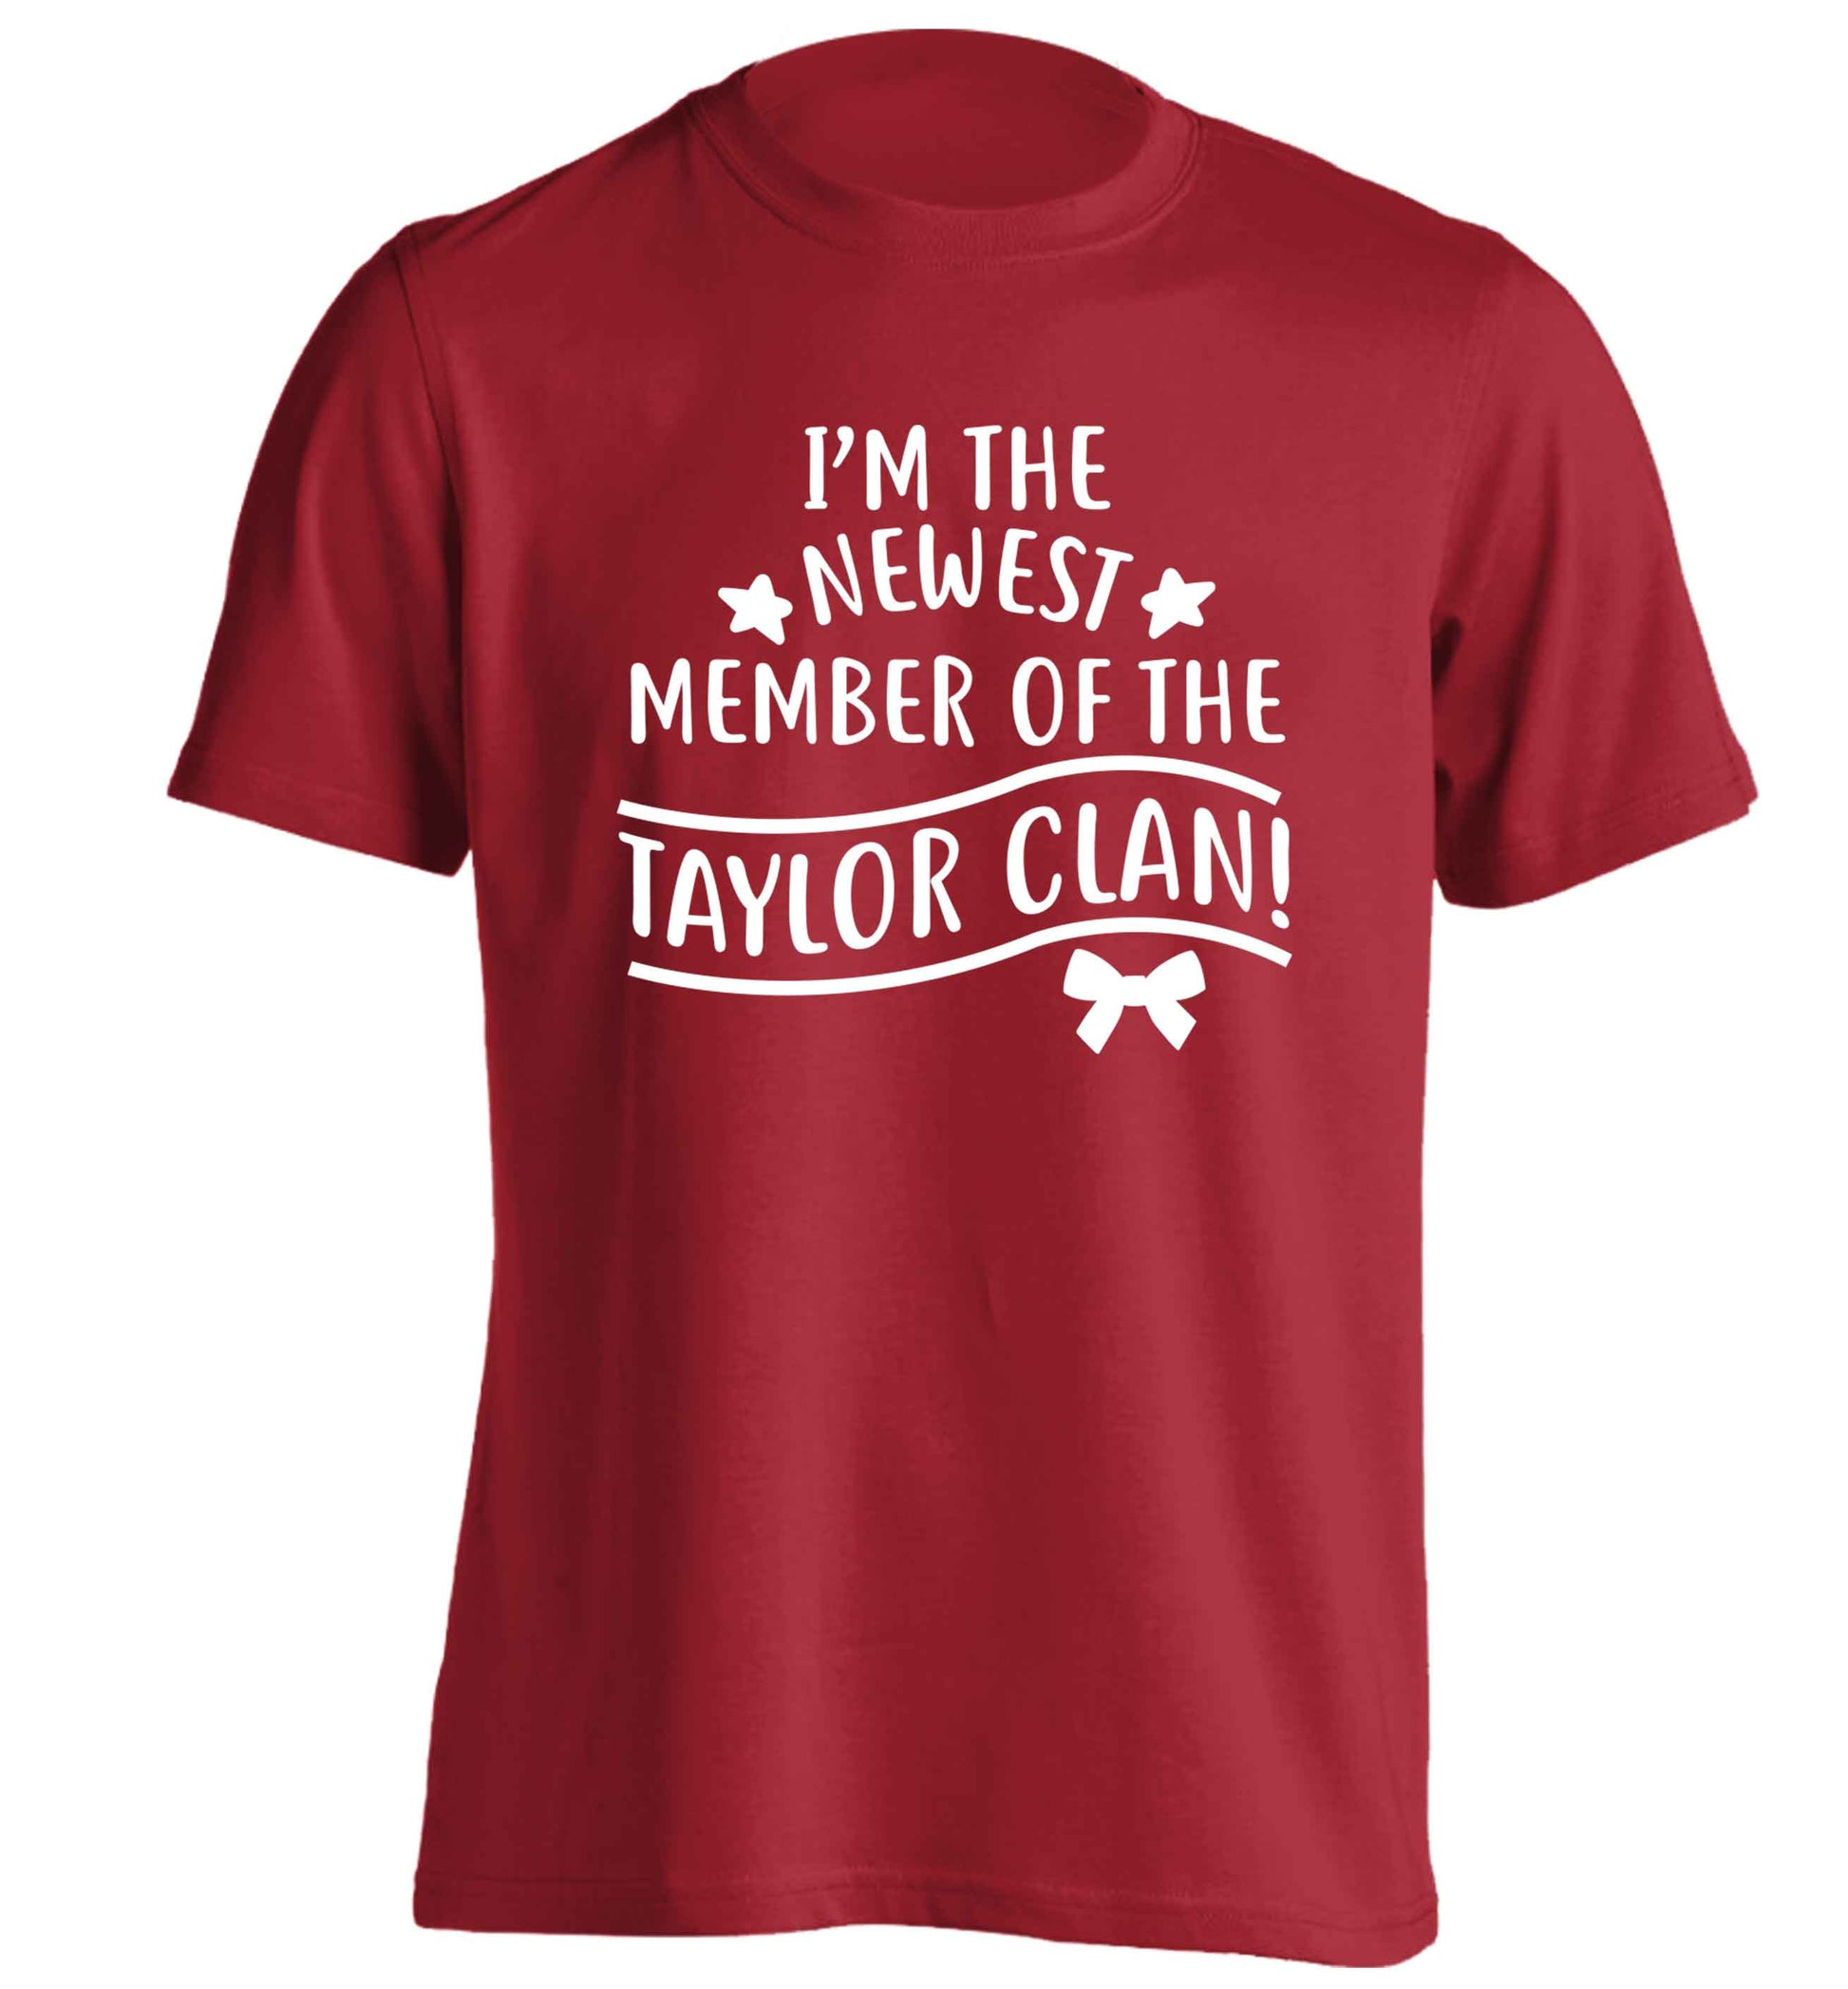 Personalised, newest member of the Taylor clan adults unisex red Tshirt 2XL